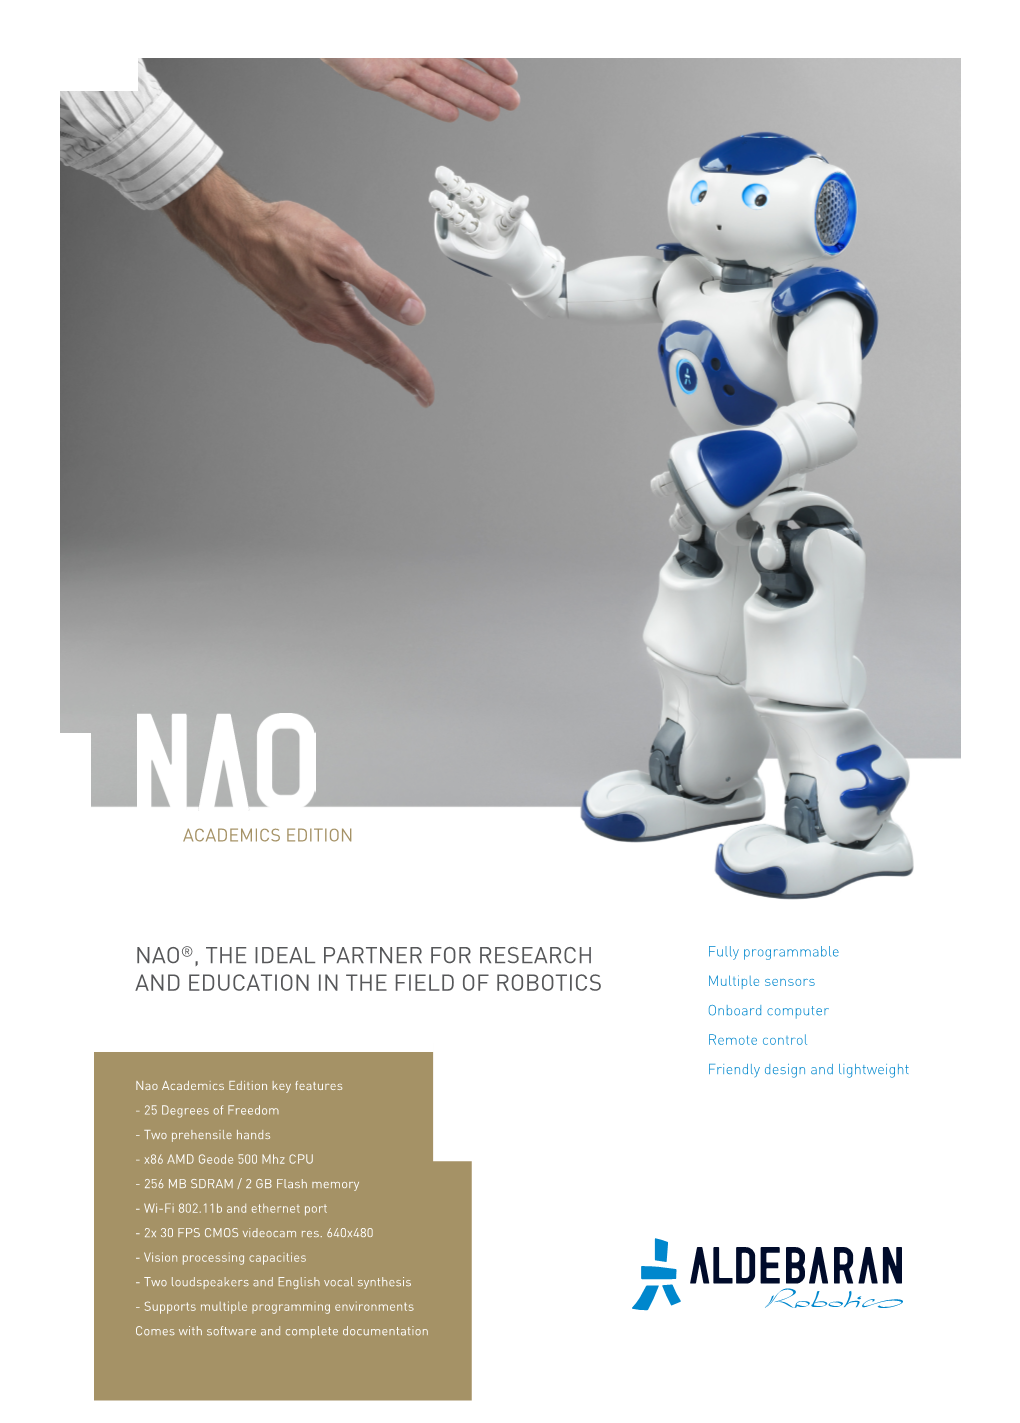 Nao®, the Ideal Partner for Research and Education